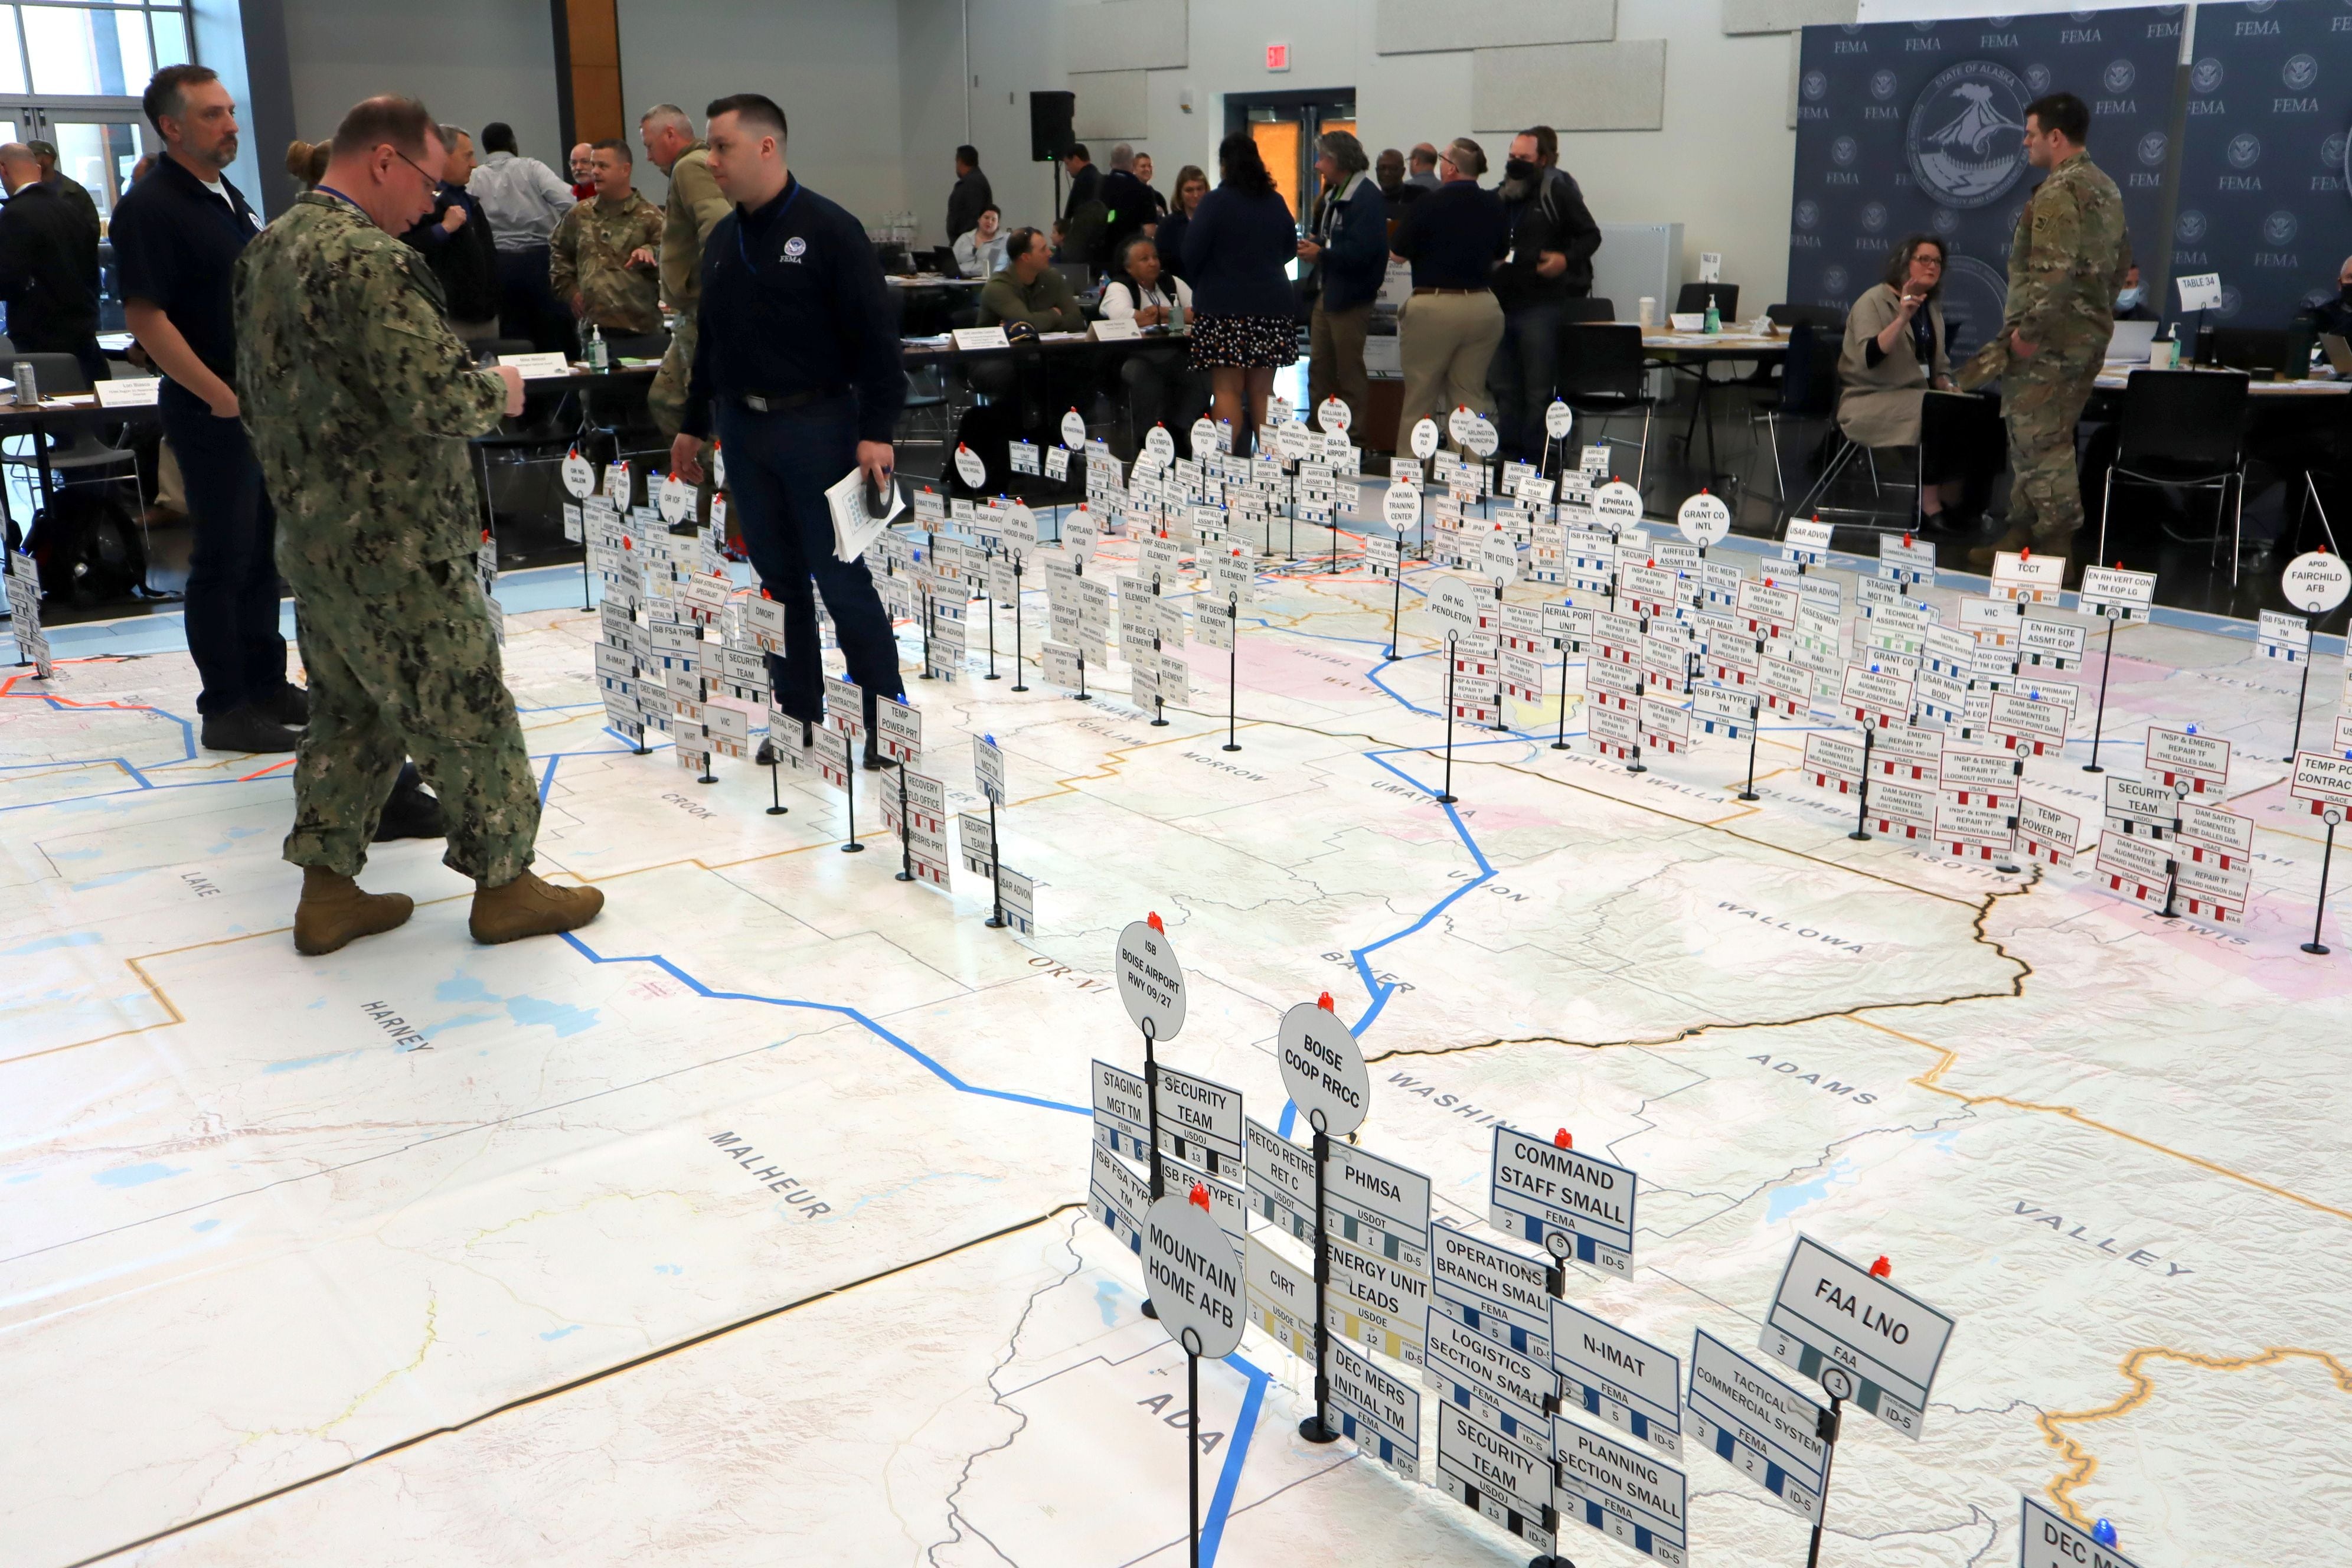 Emergency planners could move pins representing earthquake response resources during an exercise at Camp Murray, Washington, on May 4.